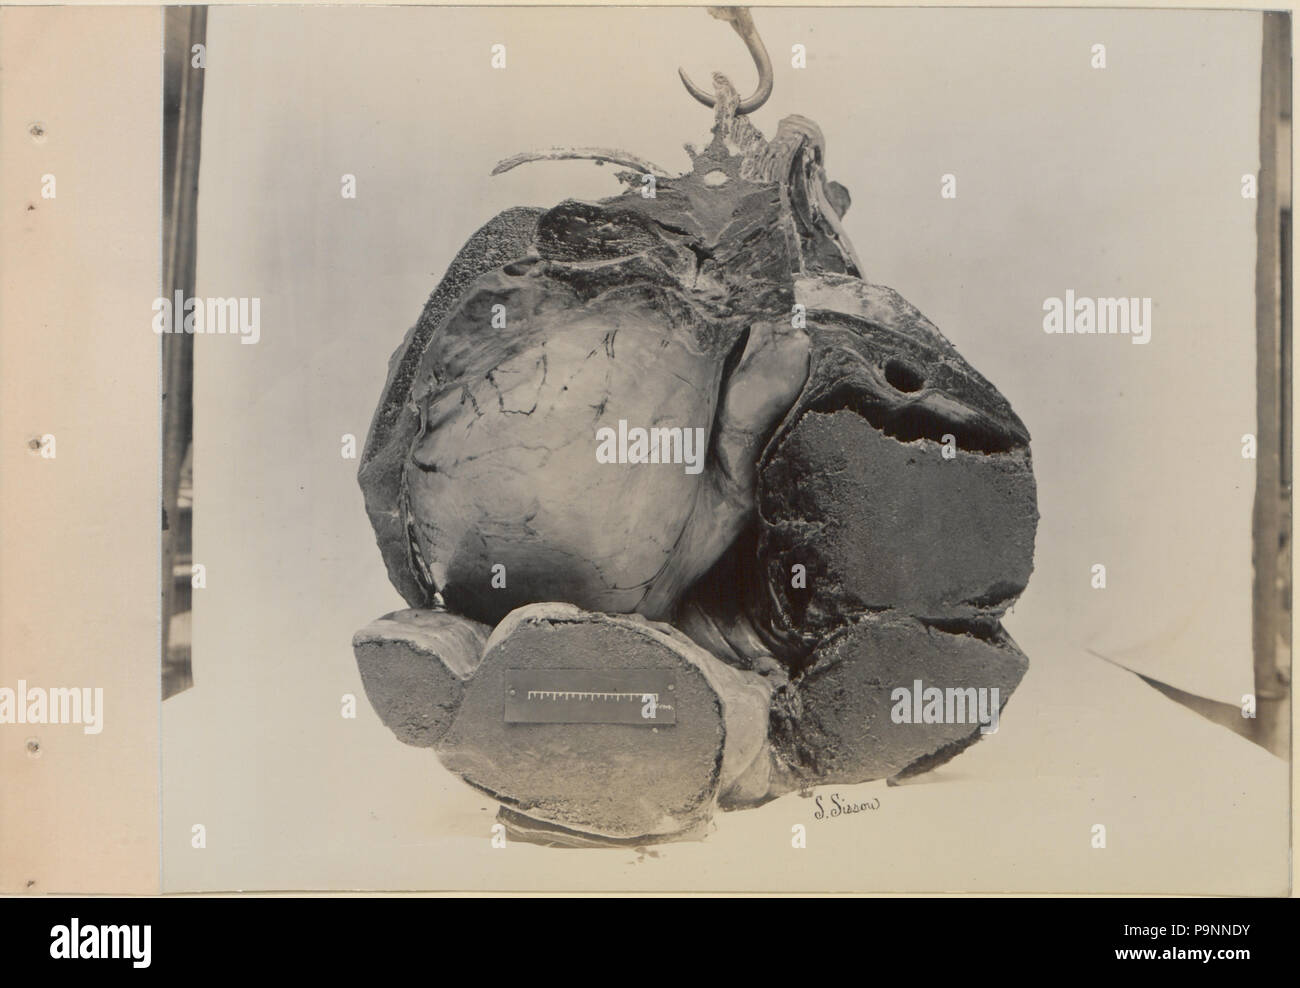 88 A series of photographs illustrating the anatomy of the horse and dog by the method of frozen preparations and sections Prepared by S Sisson of Toronto (HS85-10-9846-7) Stock Photo